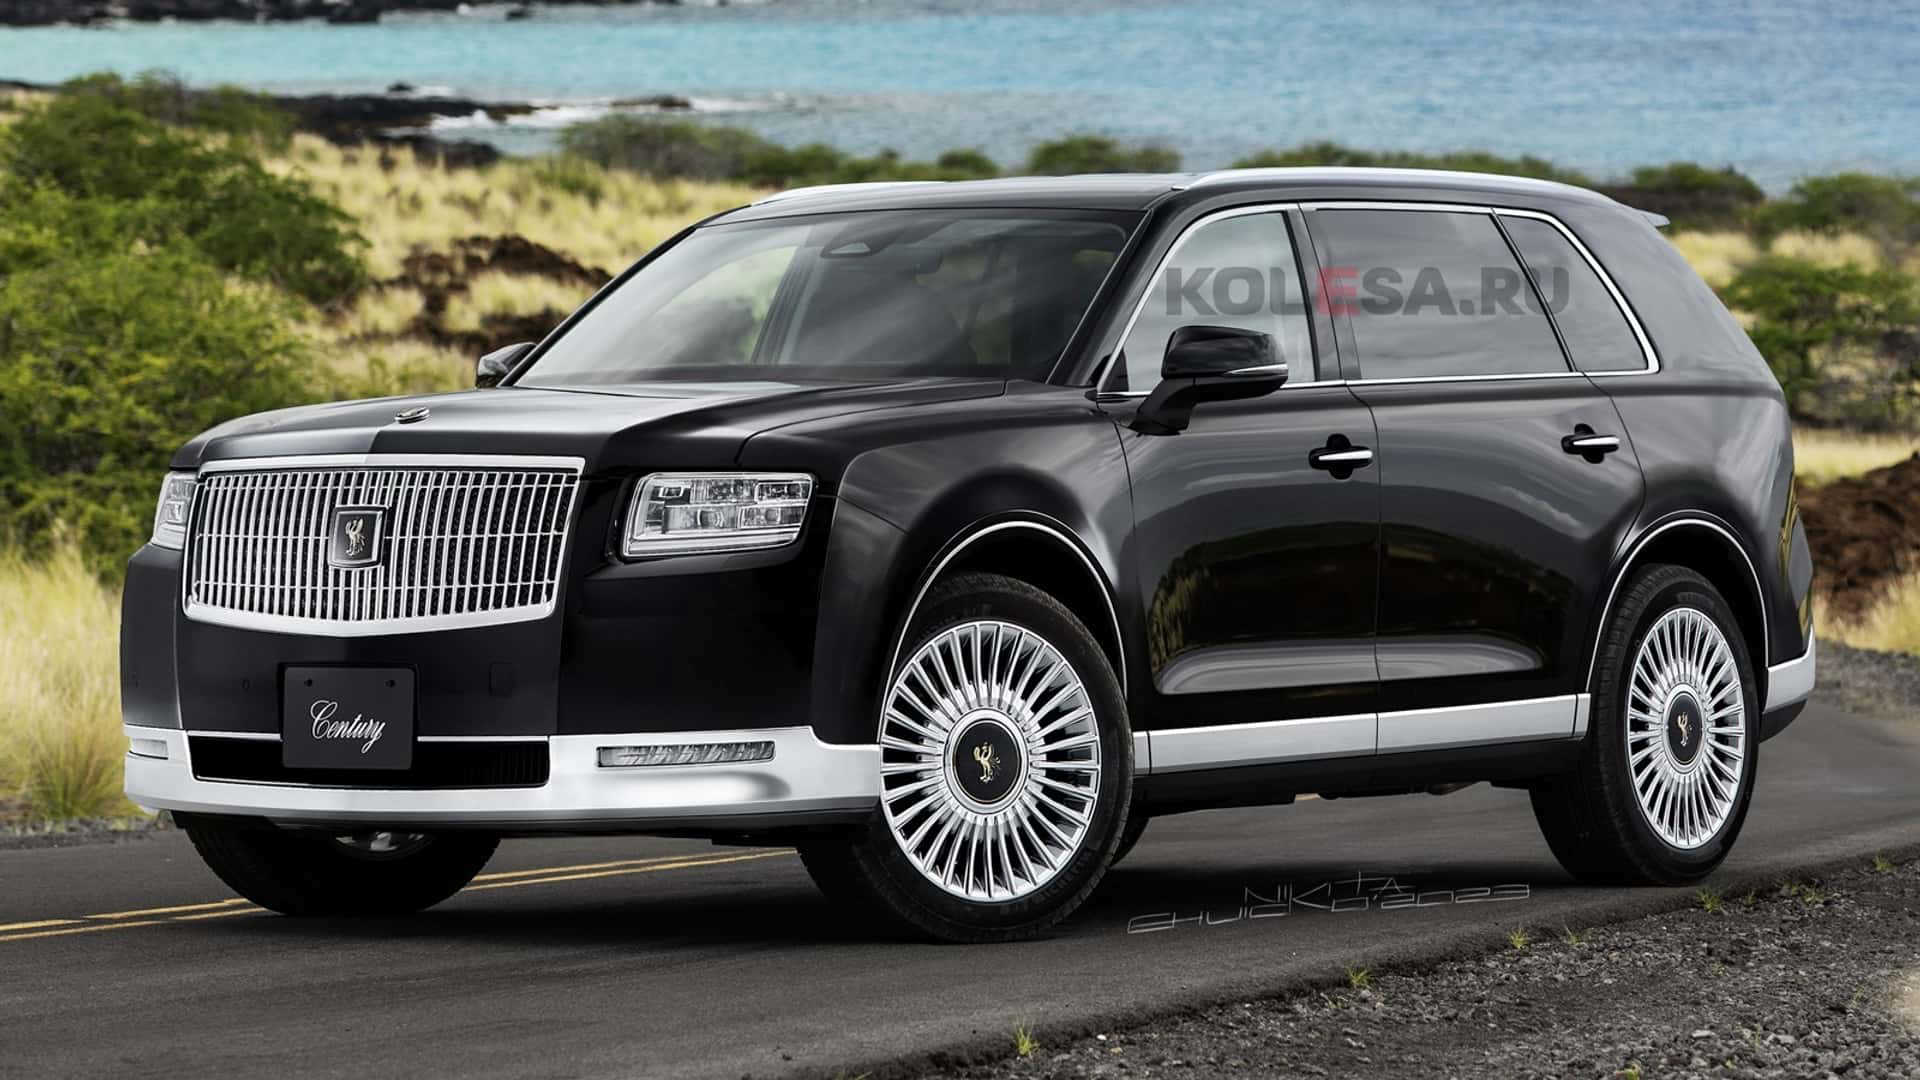 2024 Toyota Century SUV Rendered After Official Teaser Image